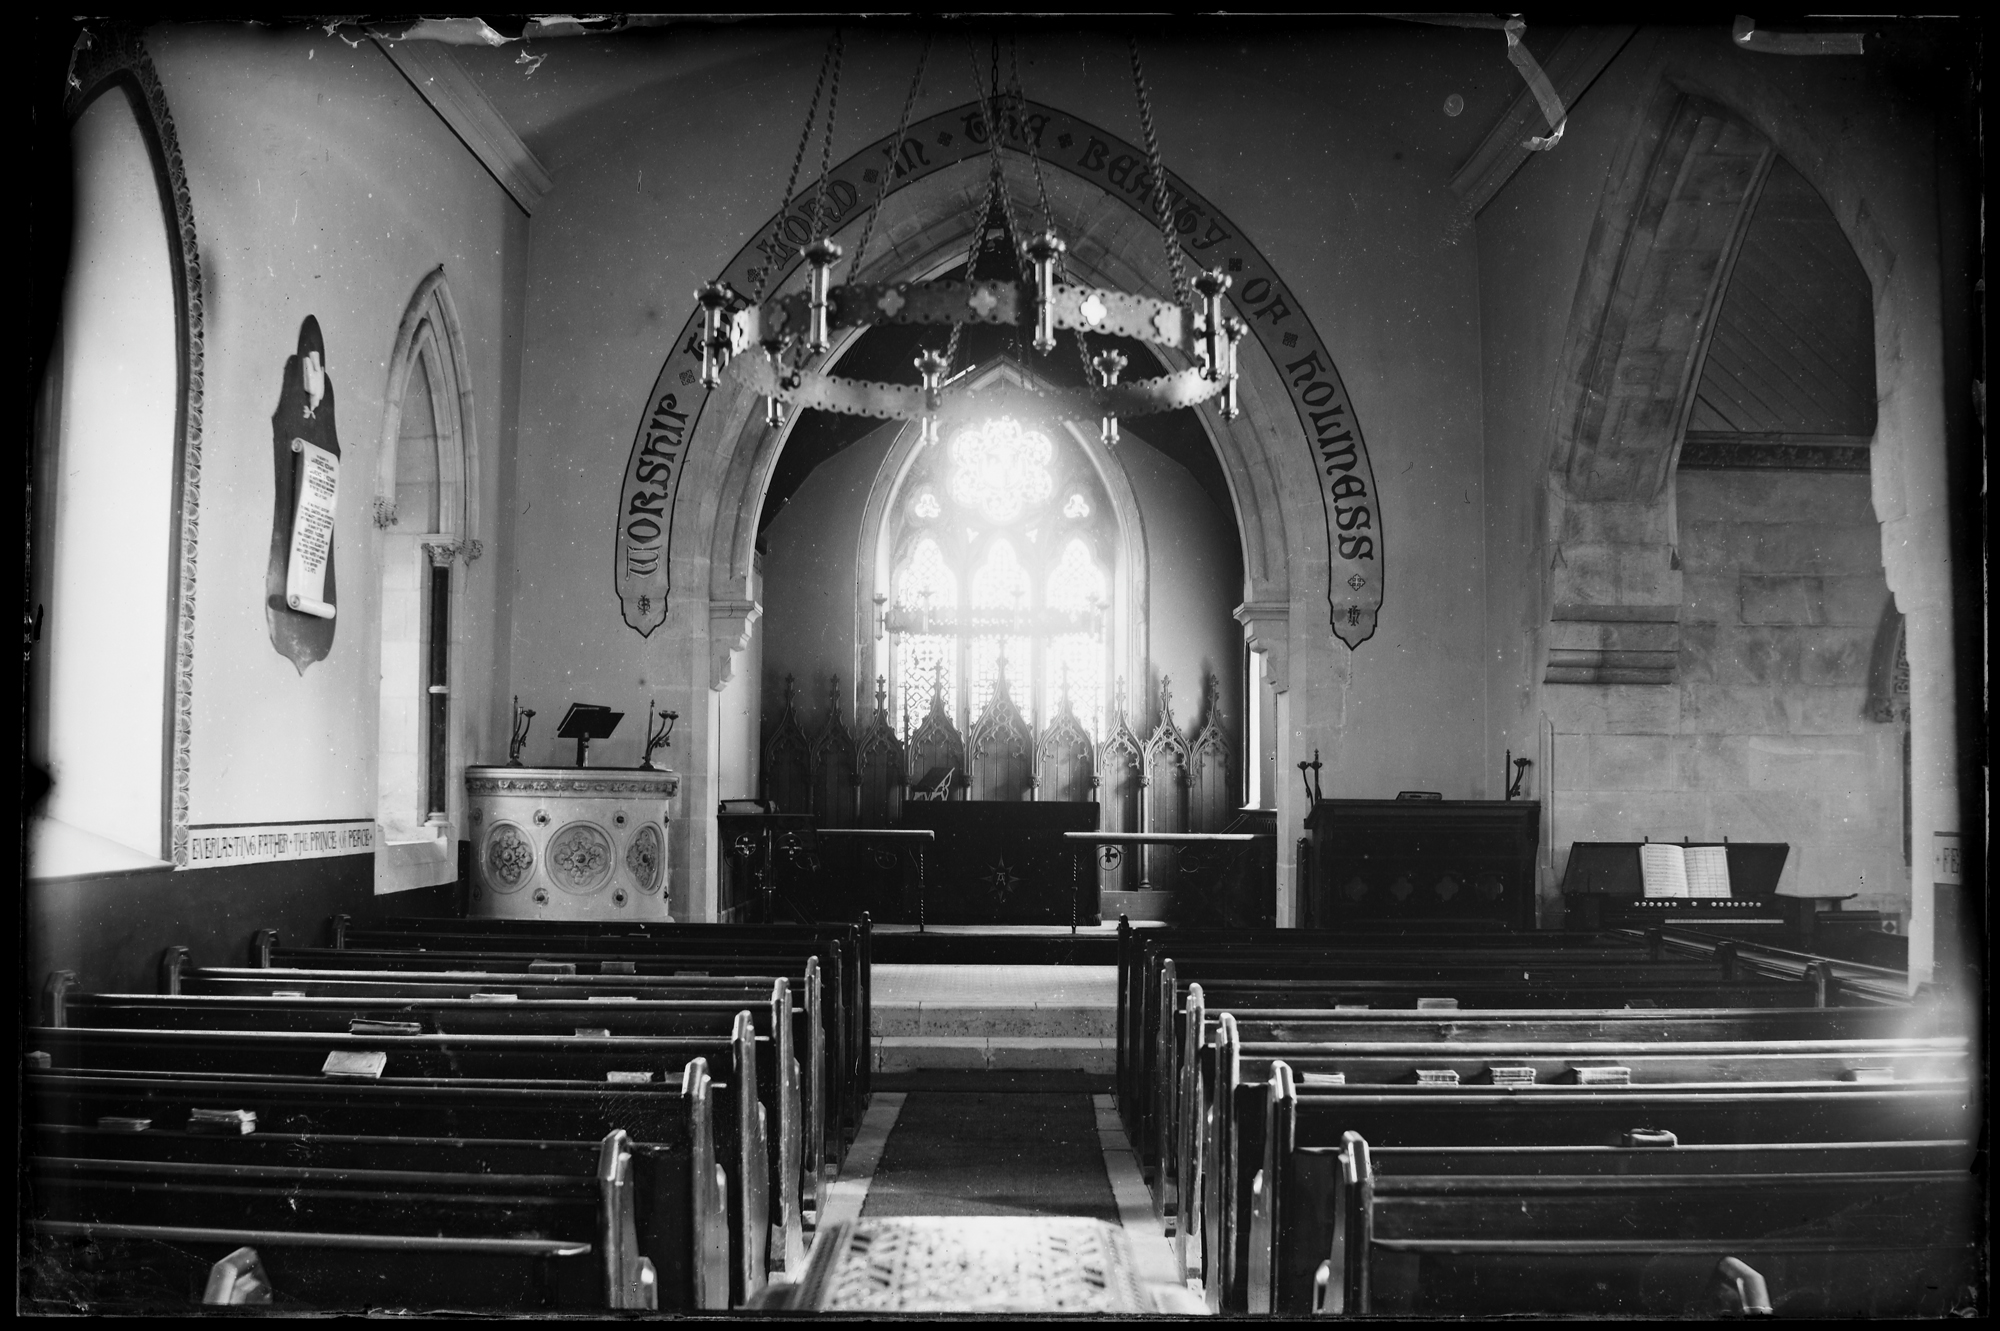 Church interior showing altar and pews. Script over altar reads 